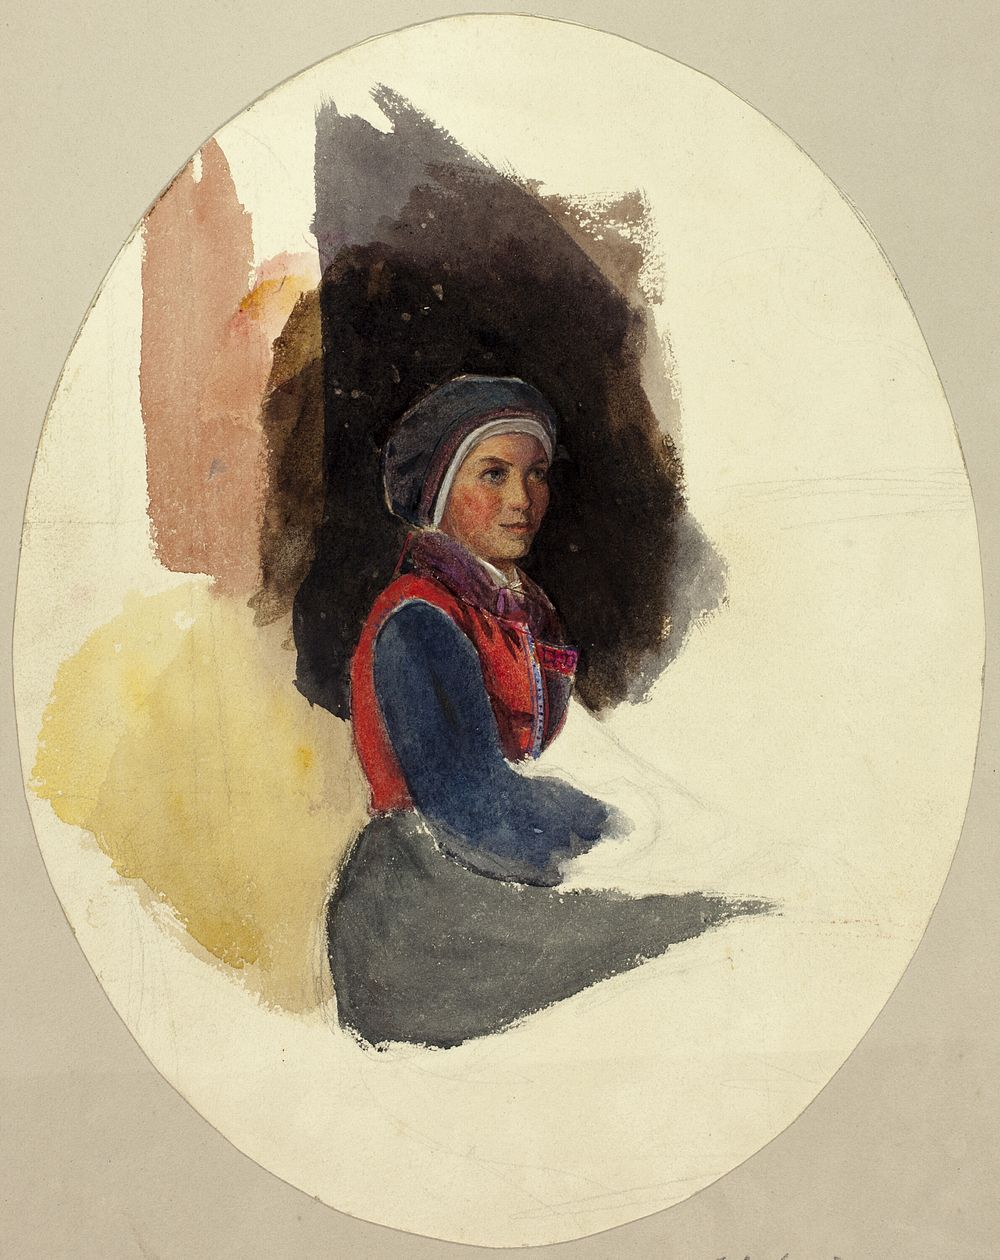 Sketch of Seated Woman in Peasant Costume by John Frederick Lewis